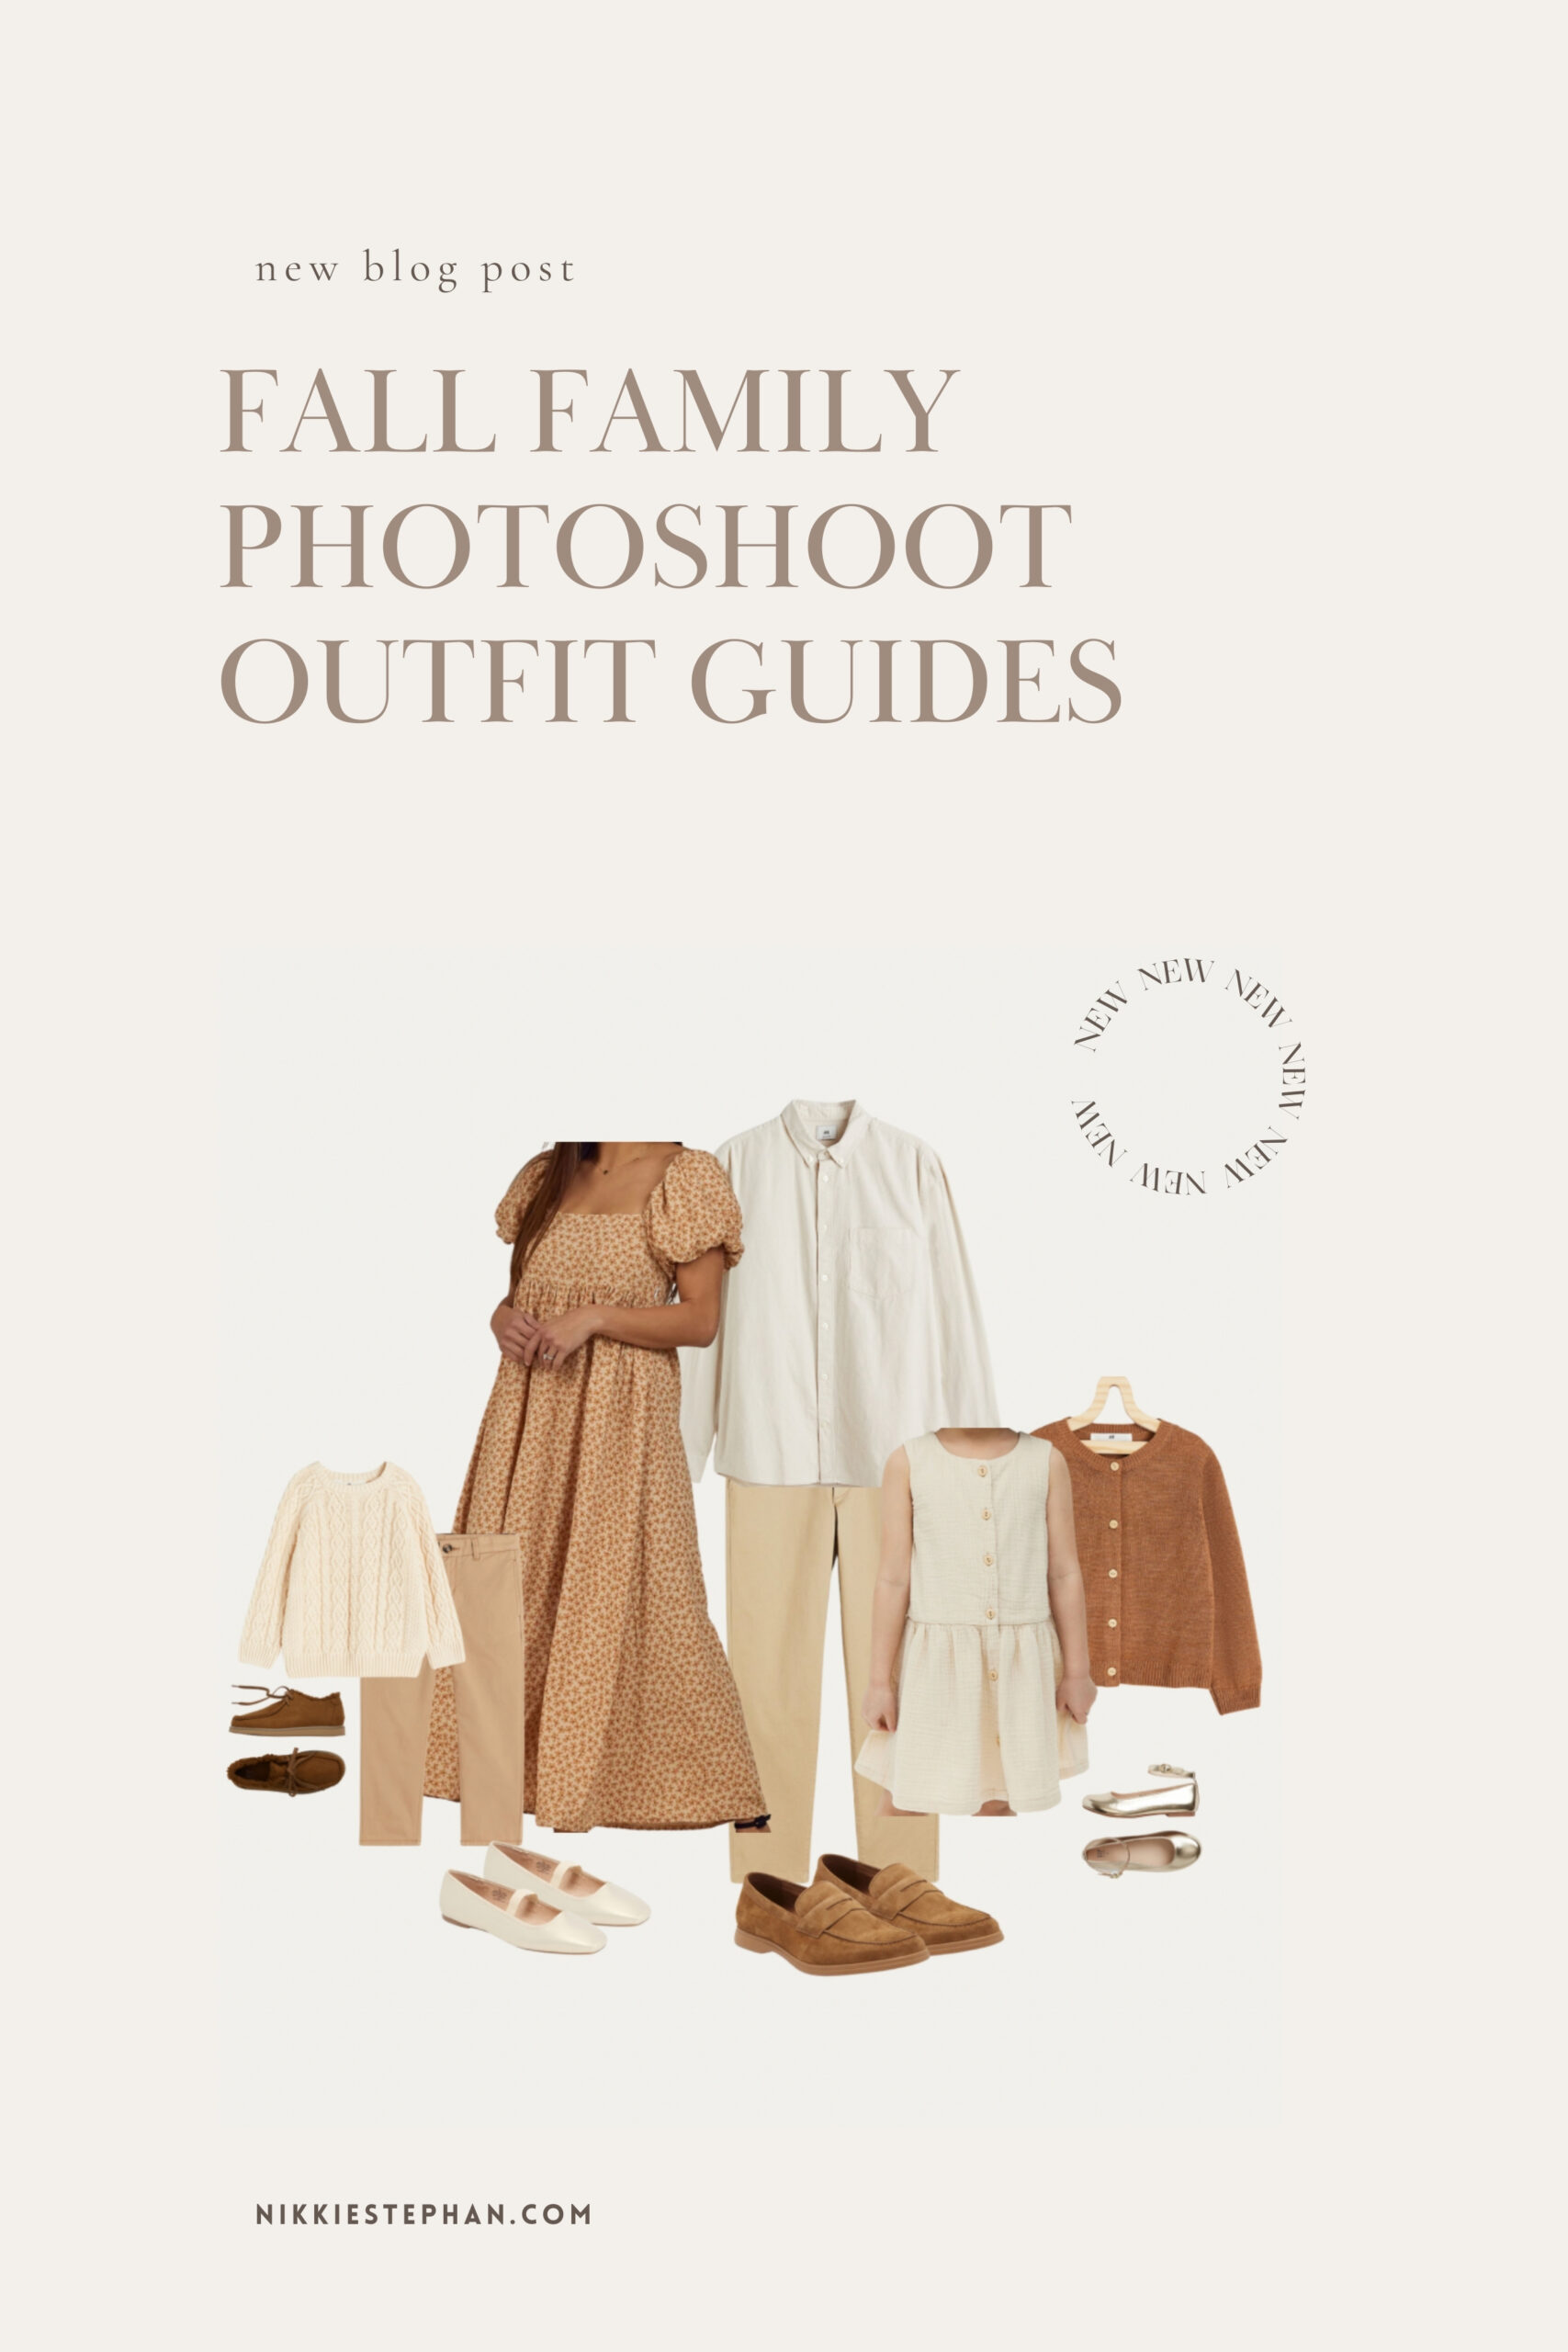 FALL FAMILY PHOTOSHOOT OUTFIT GUIDES BY NIKKI ESTEPHAN